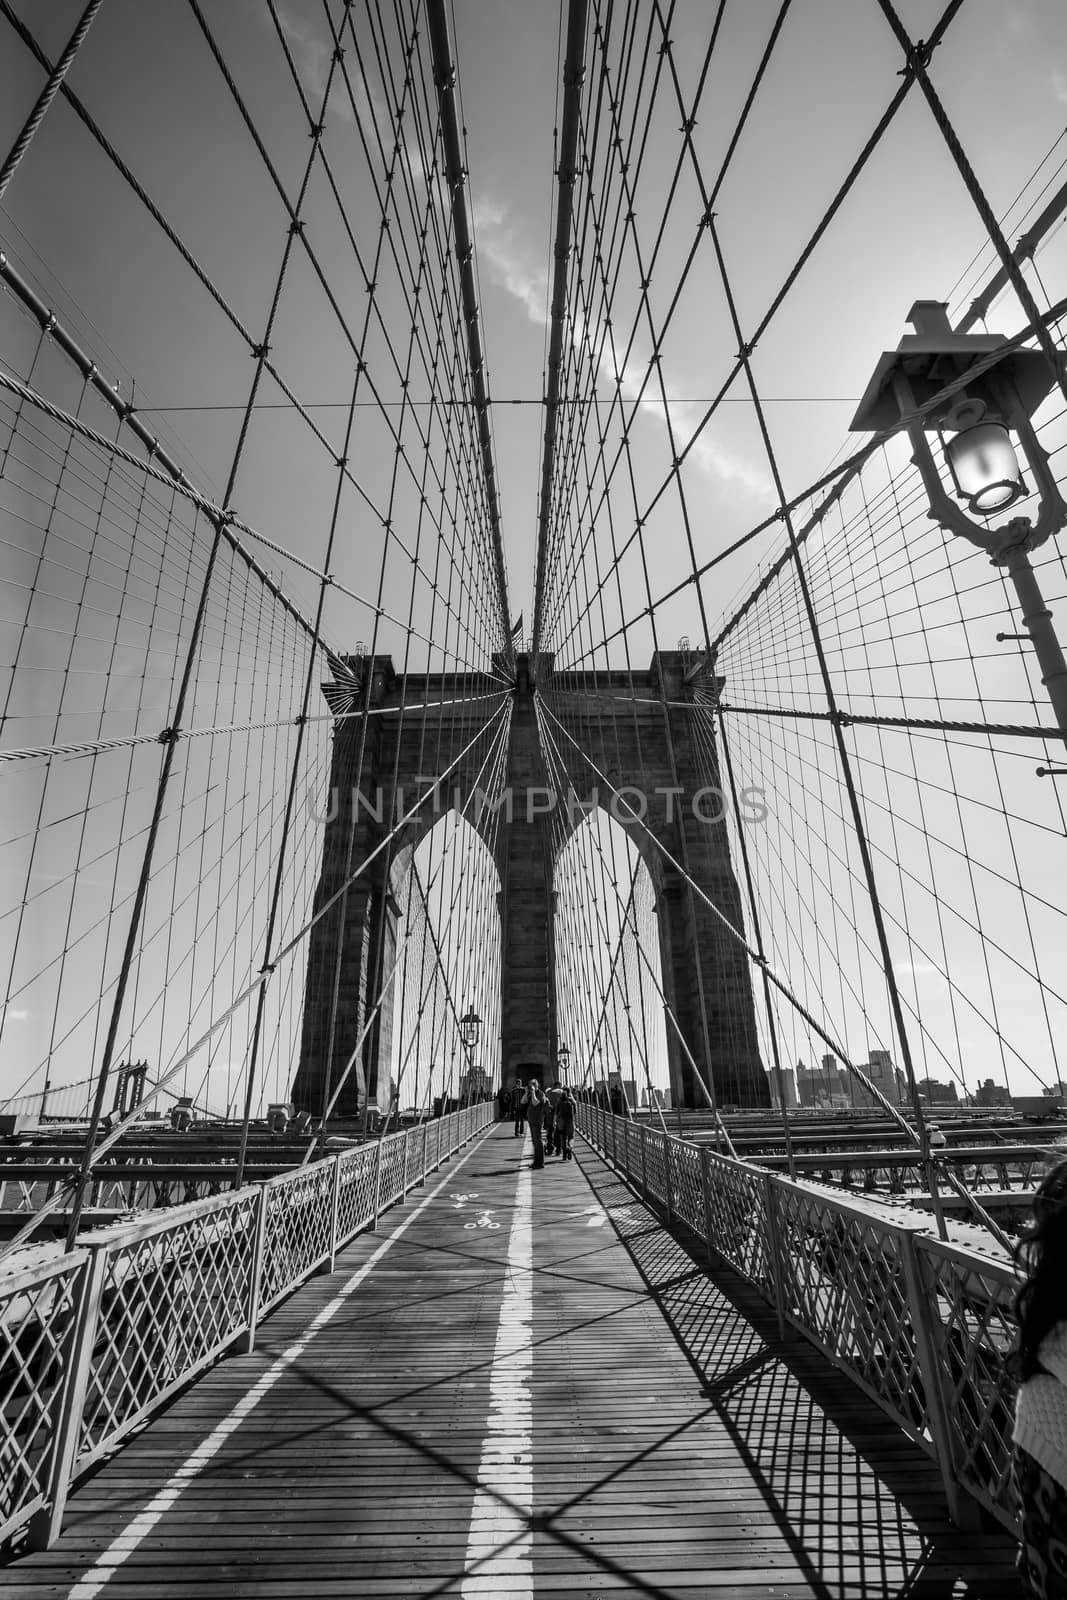 Photo of the Brooklyn Bridge in New York done in black and white.